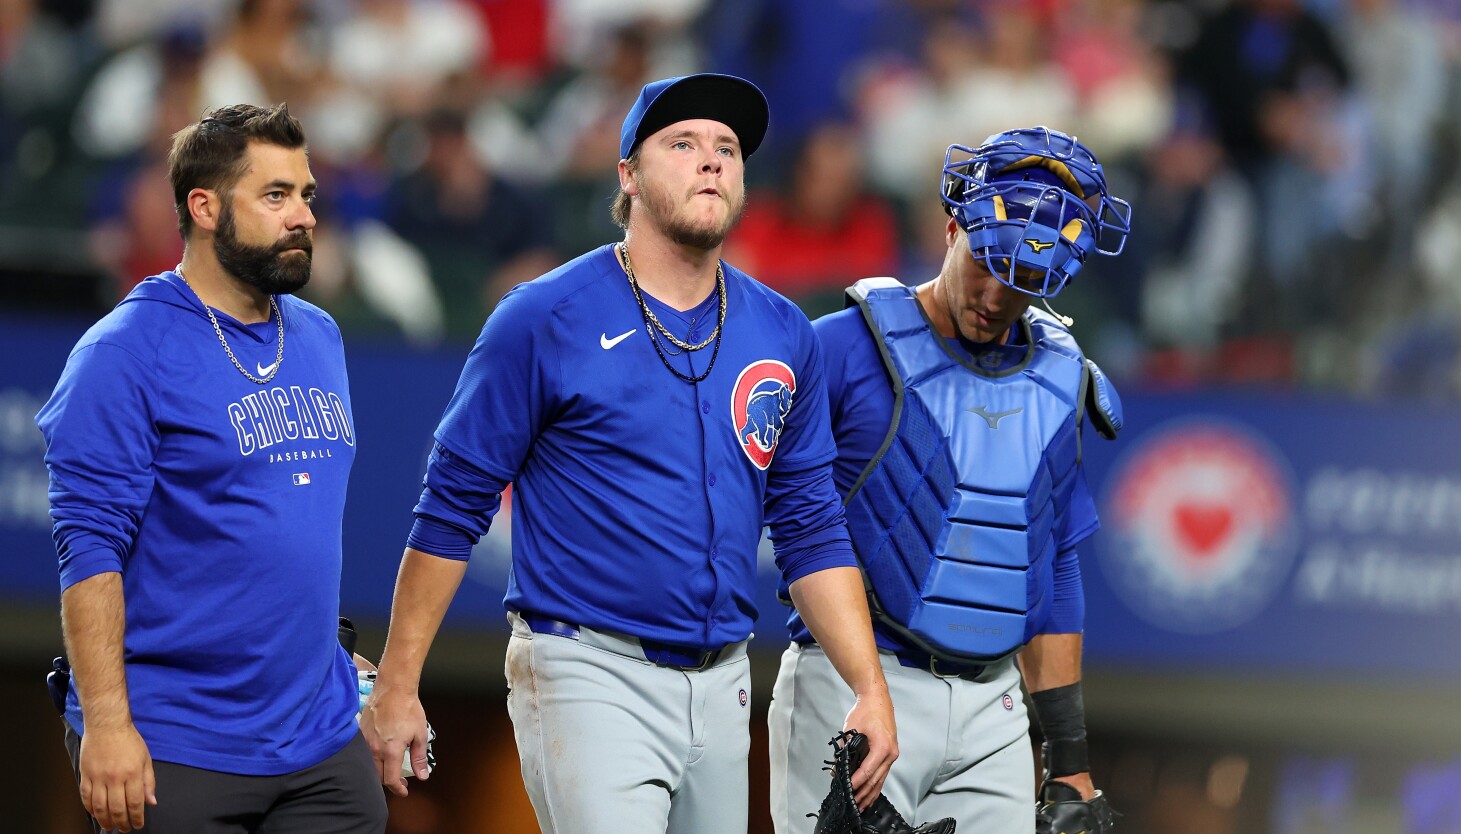 Cubs Opening Day starter Justin Steele exits game against Rangers with